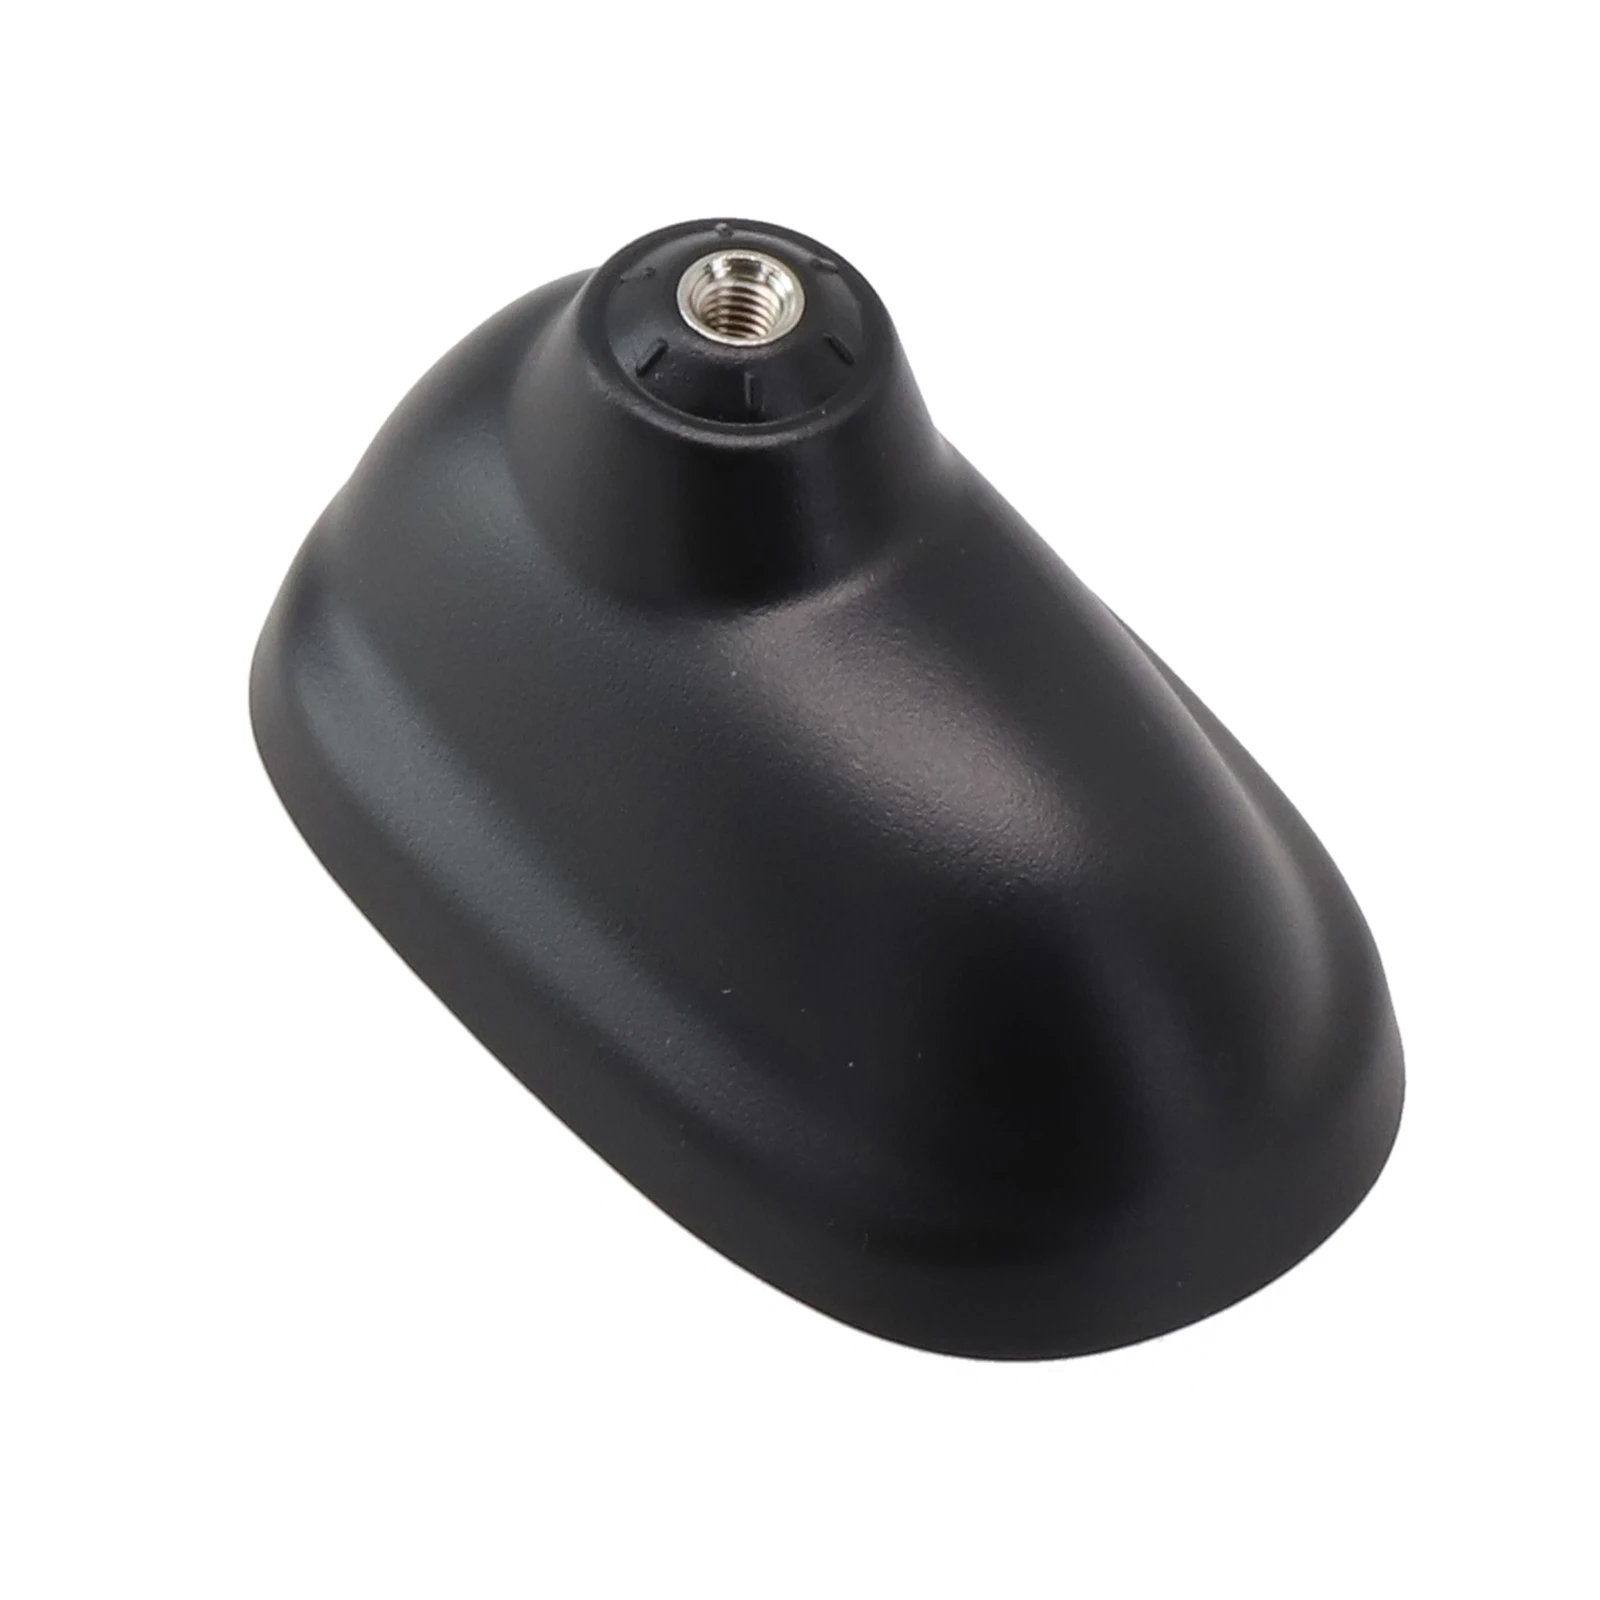 

Protect Your Antenna Small Roof Antenna Base Cover for Mini Clubman R55 R56, Strong and Durable Plastic Material